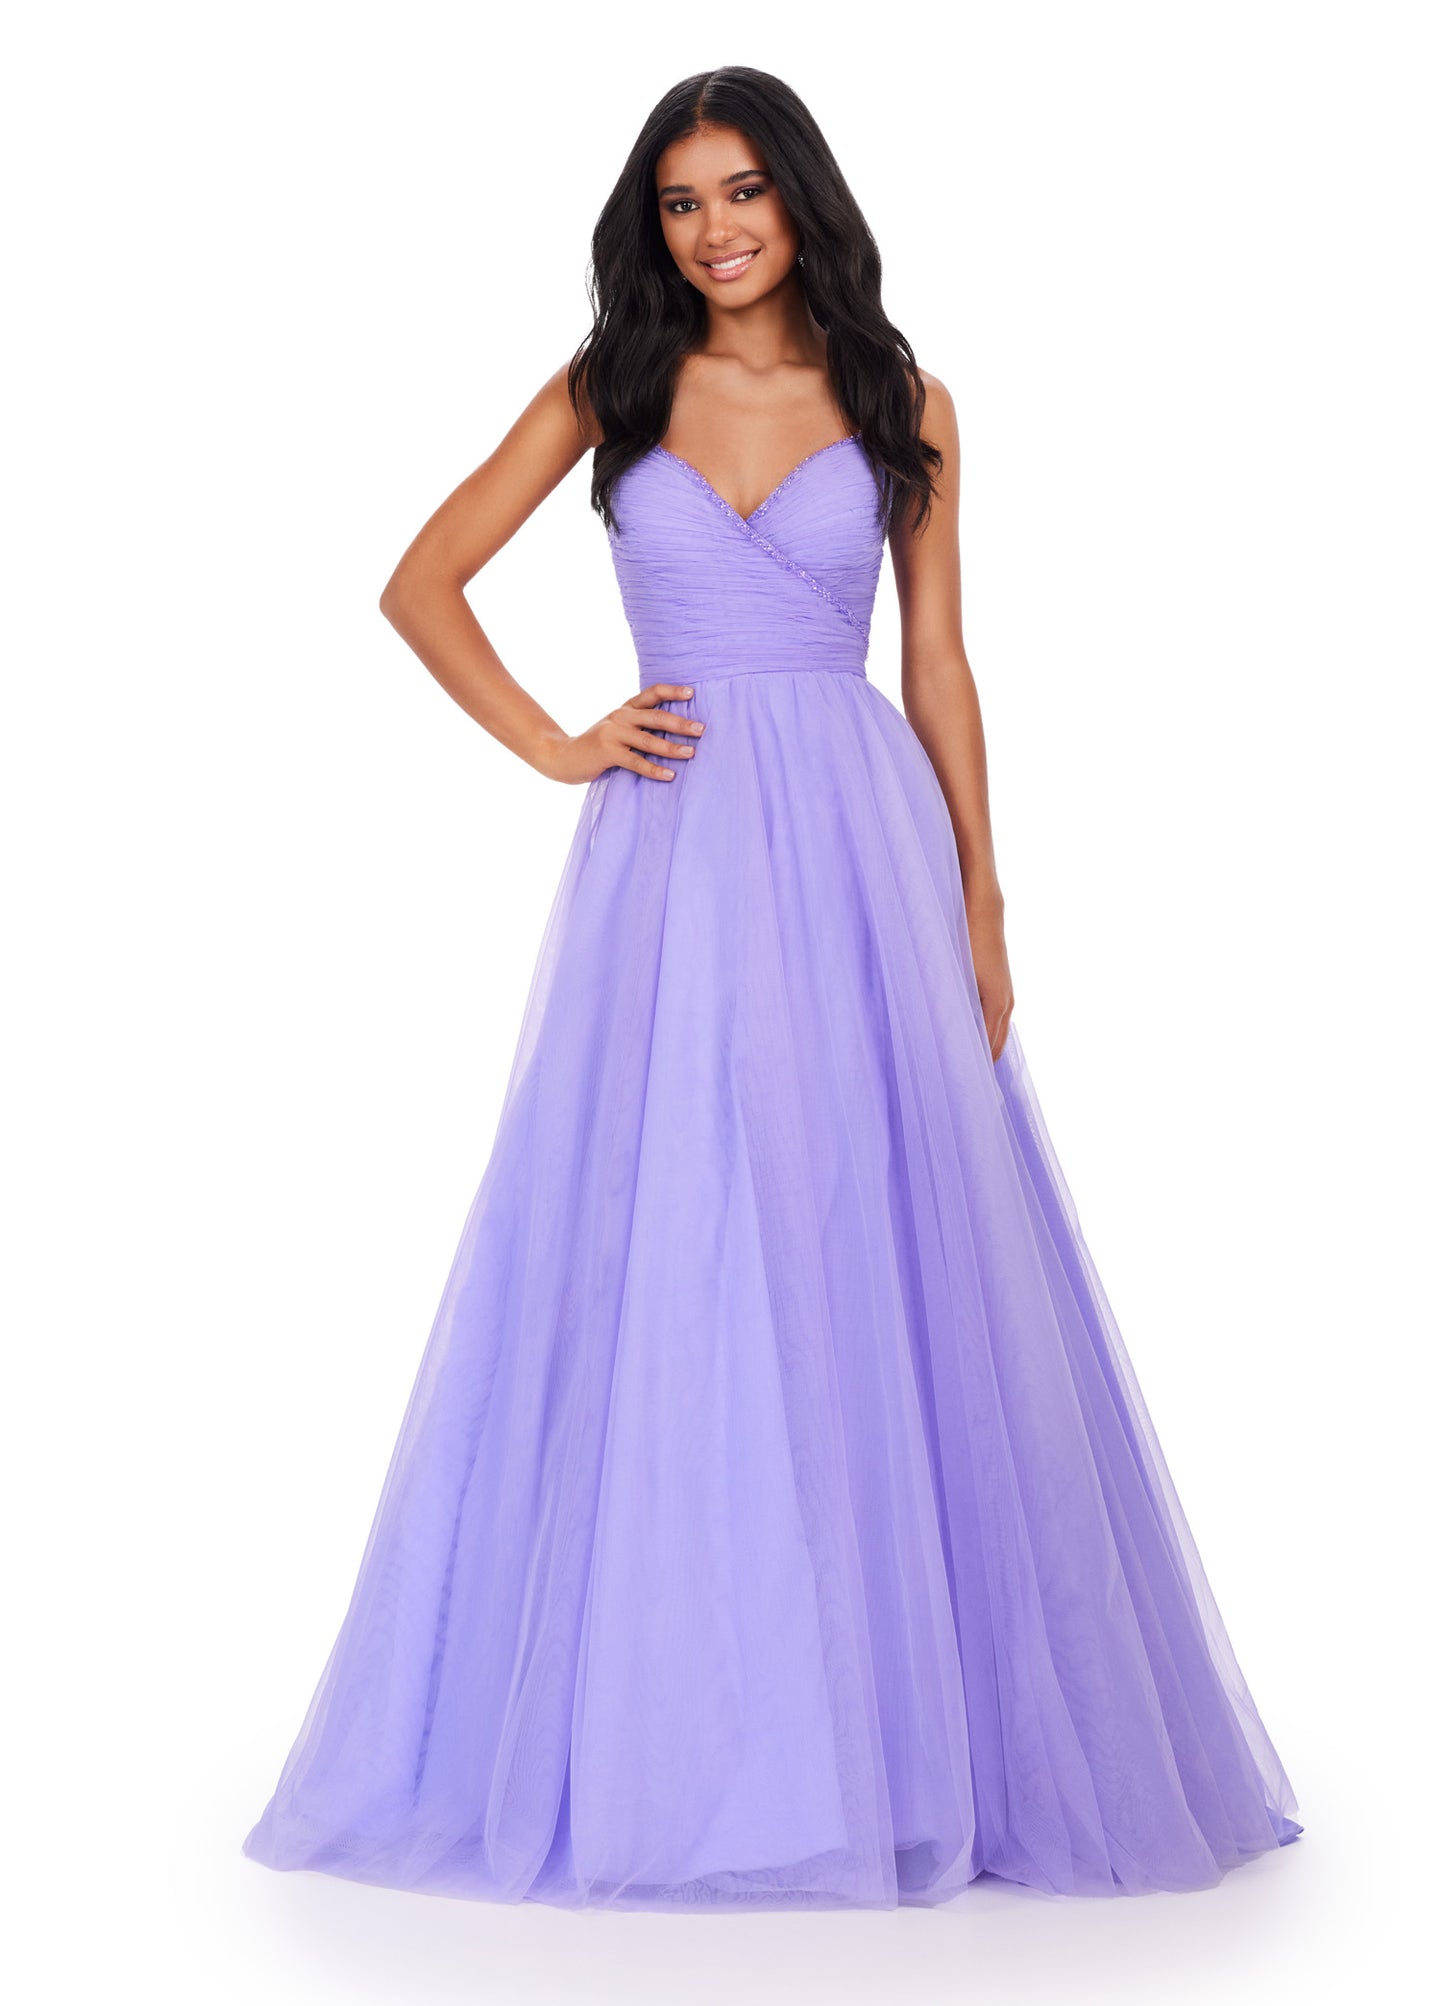 The Ashley Lauren 11461 Long Prom Dress is the perfect choice for your formal occasion. This elegant gown features delicate spaghetti straps and a tulle ball gown skirt for a timeless look. The intricate beaded detailing adds a touch of sparkle, making you stand out from the crowd. Experience the ultimate in luxury with this pageant-worthy dress. This simplistic ball gown features dainty beaded spaghetti straps with a ruched bodice.